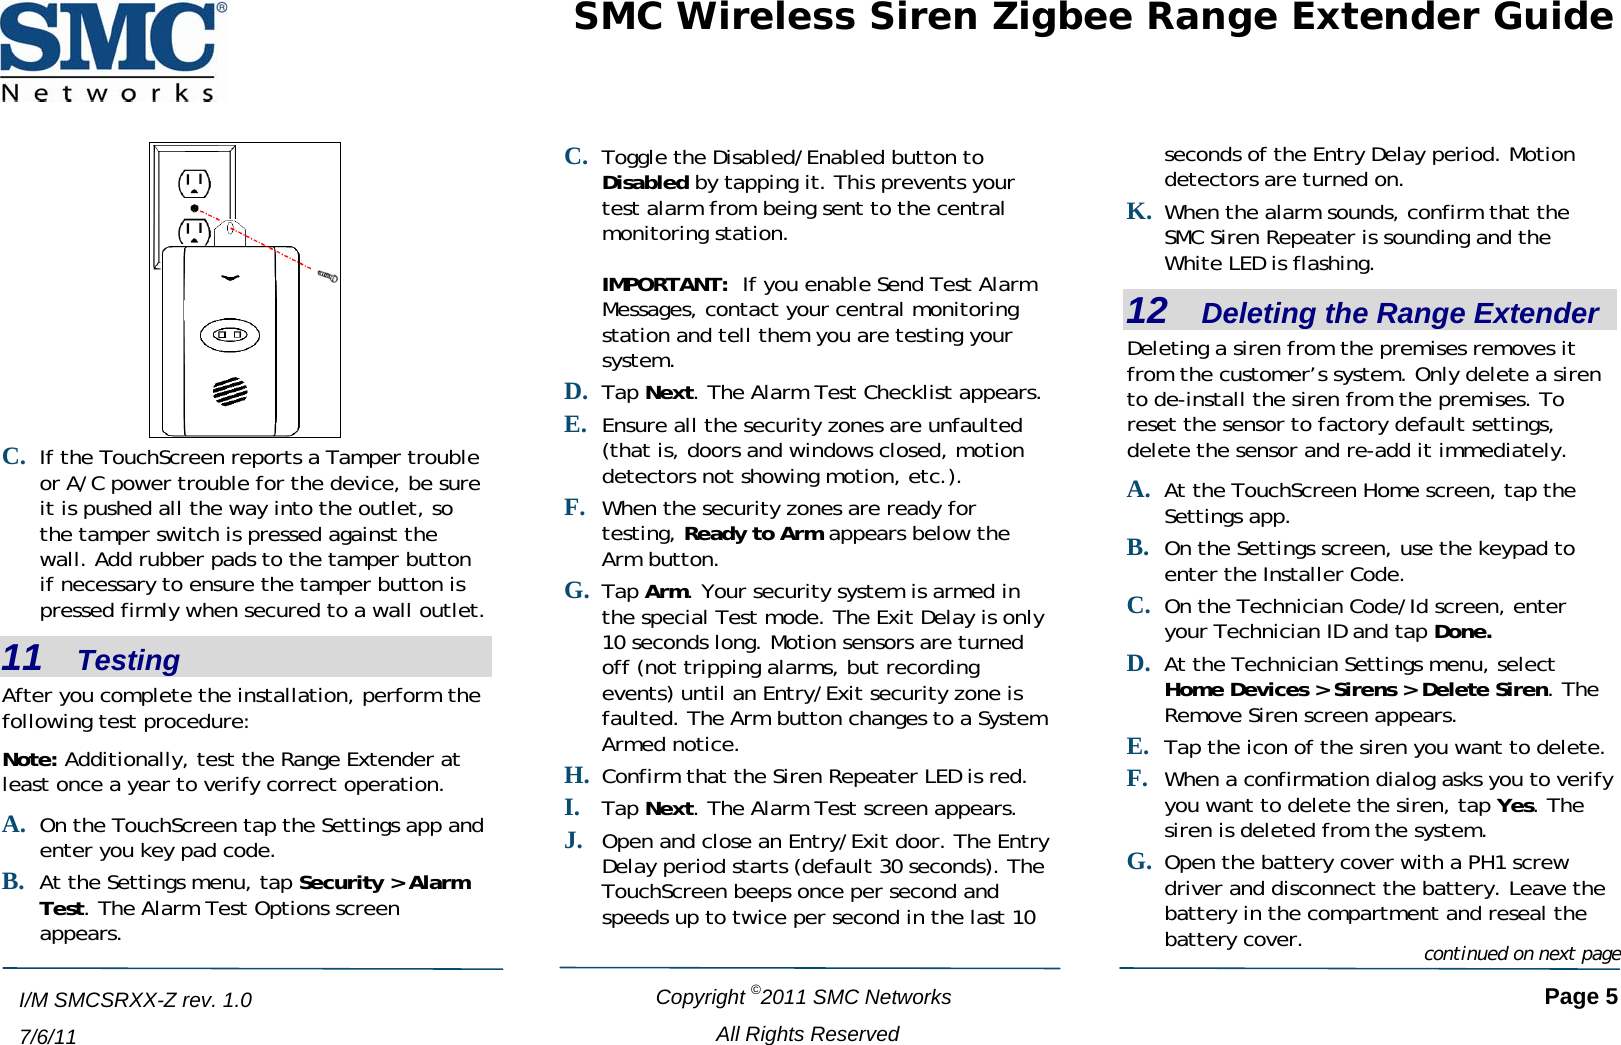 SMC Wireless Siren Zigbee Range Extender Guide    Copyright ©2011 SMC Networks   Page 5 All Rights Reserved  I/M SMCSRXX-Z rev. 1.0 7/6/11 C. If the TouchScreen reports a Tamper trouble or A/C power trouble for the device, be sure it is pushed all the way into the outlet, so the tamper switch is pressed against the wall. Add rubber pads to the tamper button if necessary to ensure the tamper button is pressed firmly when secured to a wall outlet. 11   Testing After you complete the installation, perform the following test procedure: Note: Additionally, test the Range Extender at least once a year to verify correct operation. A. On the TouchScreen tap the Settings app and enter you key pad code. B. At the Settings menu, tap Security &gt; Alarm Test. The Alarm Test Options screen appears. C. Toggle the Disabled/Enabled button to Disabled by tapping it. This prevents your test alarm from being sent to the central monitoring station.  IMPORTANT:  If you enable Send Test Alarm Messages, contact your central monitoring station and tell them you are testing your system. D. Tap Next. The Alarm Test Checklist appears. E. Ensure all the security zones are unfaulted (that is, doors and windows closed, motion detectors not showing motion, etc.). F. When the security zones are ready for testing, Ready to Arm appears below the Arm button.  G. Tap Arm. Your security system is armed in the special Test mode. The Exit Delay is only 10 seconds long. Motion sensors are turned off (not tripping alarms, but recording events) until an Entry/Exit security zone is faulted. The Arm button changes to a System Armed notice. H. Confirm that the Siren Repeater LED is red. I. Tap Next. The Alarm Test screen appears. J. Open and close an Entry/Exit door. The Entry Delay period starts (default 30 seconds). The TouchScreen beeps once per second and speeds up to twice per second in the last 10 seconds of the Entry Delay period. Motion detectors are turned on. When the alarm soundsK. , confirm that the SMC Siren Repeater is sounding and the White LED is flashing. 12   Deleting the Range Extender Deleting a siren from the premises removes itfrom the customer’s system. Only delete a sito de-install the siren from the premises. To  r n G. battery in the comparbattery cover. continued on next pagereset the sensor to factory default settings, delete the sensor and re-add it immediately. A. At the TouchScreen Home screen, tap the Settings app. B. On the Settings screen, use the keypad to enter the Installer Code.  C. On the Technician Code/Id screen, enter your Technician ID and tap Done. At the Technician SettingD. s menu, select Home Devices &gt; Sirens &gt; Delete Siren. The Remove Siren screen appears. Tap the icon of the siren you want to delete.  When a confirmation dialog asks you tE. F. o verify you want to delete the siren, tap Yes. The siren is deleted from the system.  Open the battery cover with a PH1 screw driver and disconnect the battery. Leave the tment and reseal the e